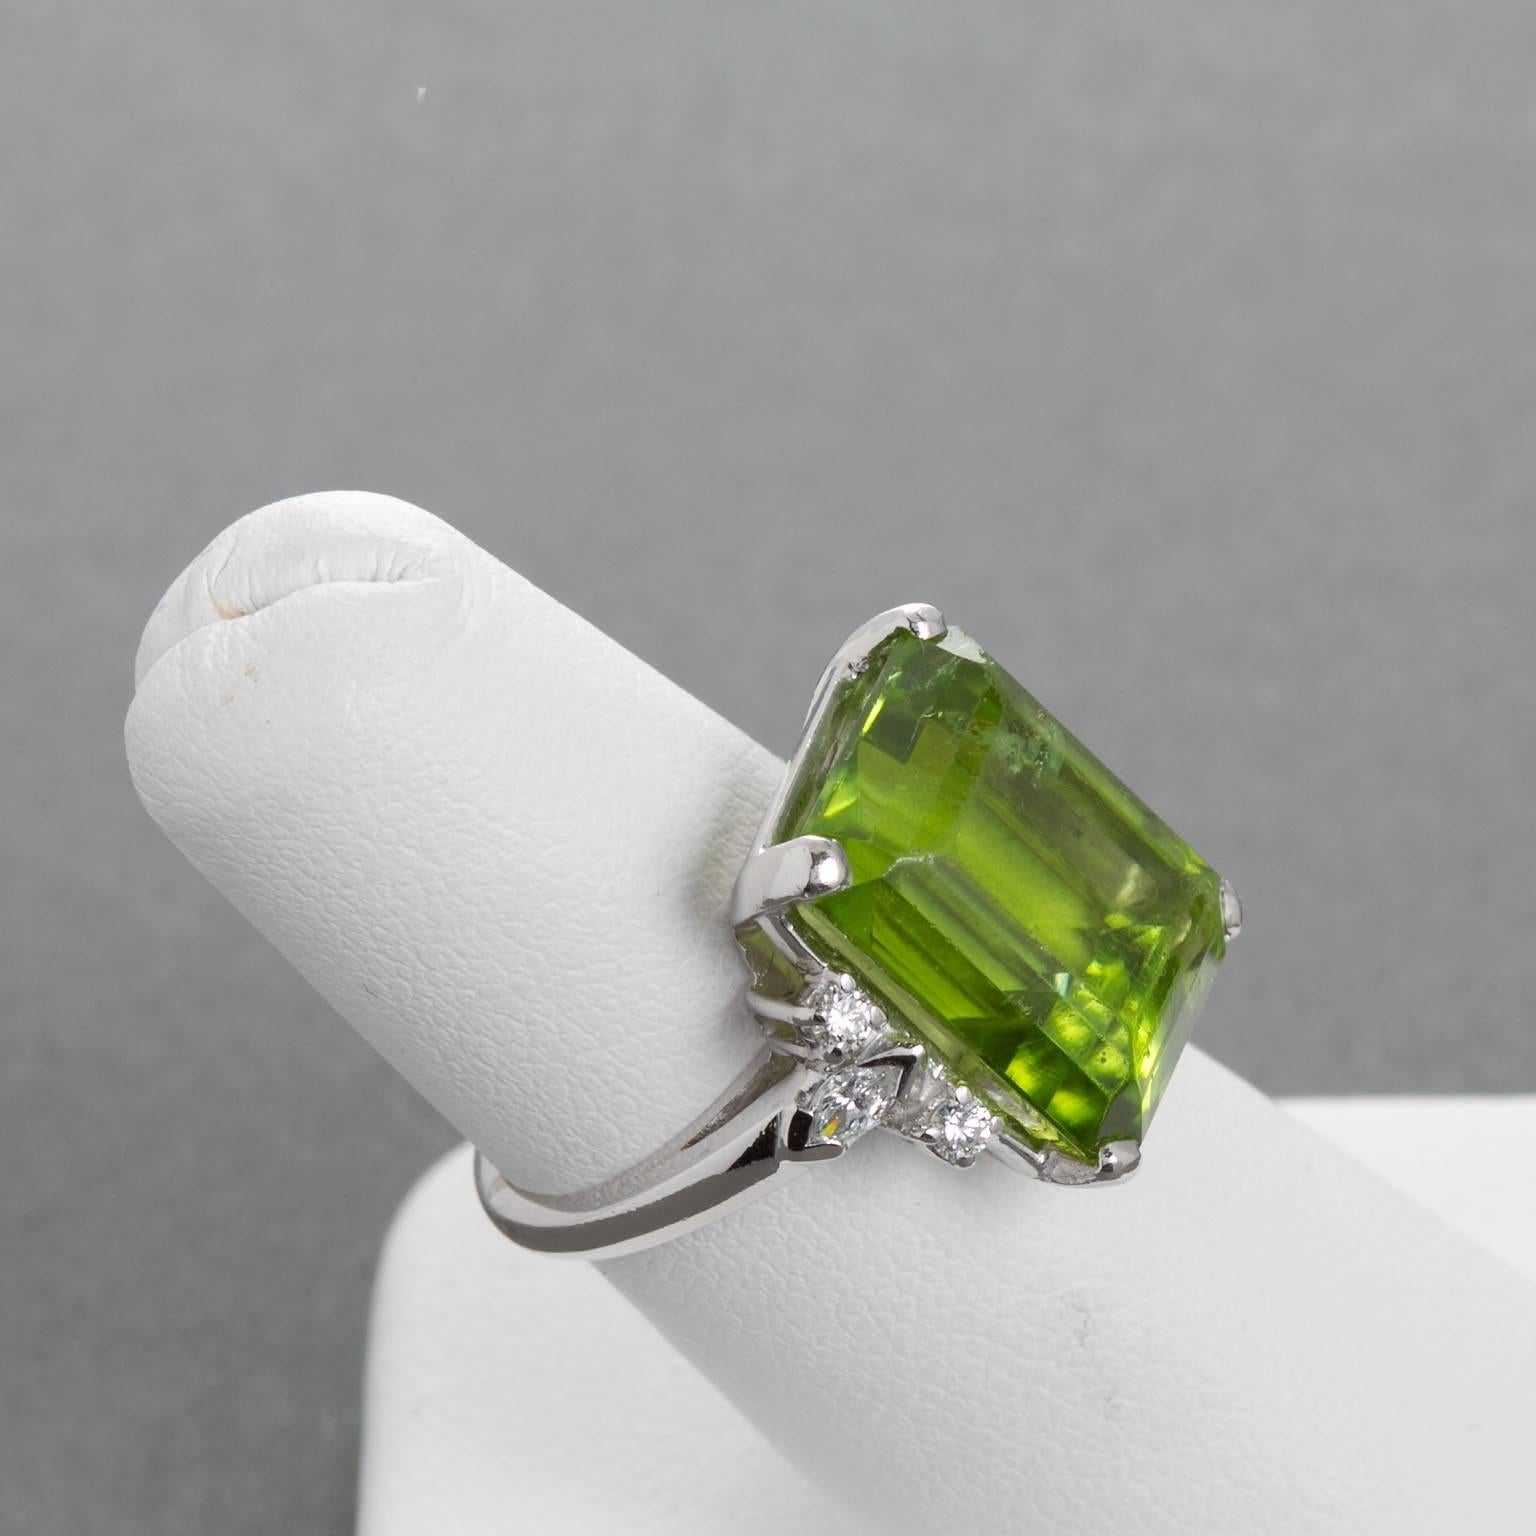 A large approx. 10.70 ct olive green emerald cut peridot set in a diamond and platinum ring. Two marquise shaped diamonds and four round brilliant diamonds, 0.40 ctw. Ring custom sized to fit.
Periodot dimensions: 14.60 x 11.50 x 8.70 mm

No. 6663